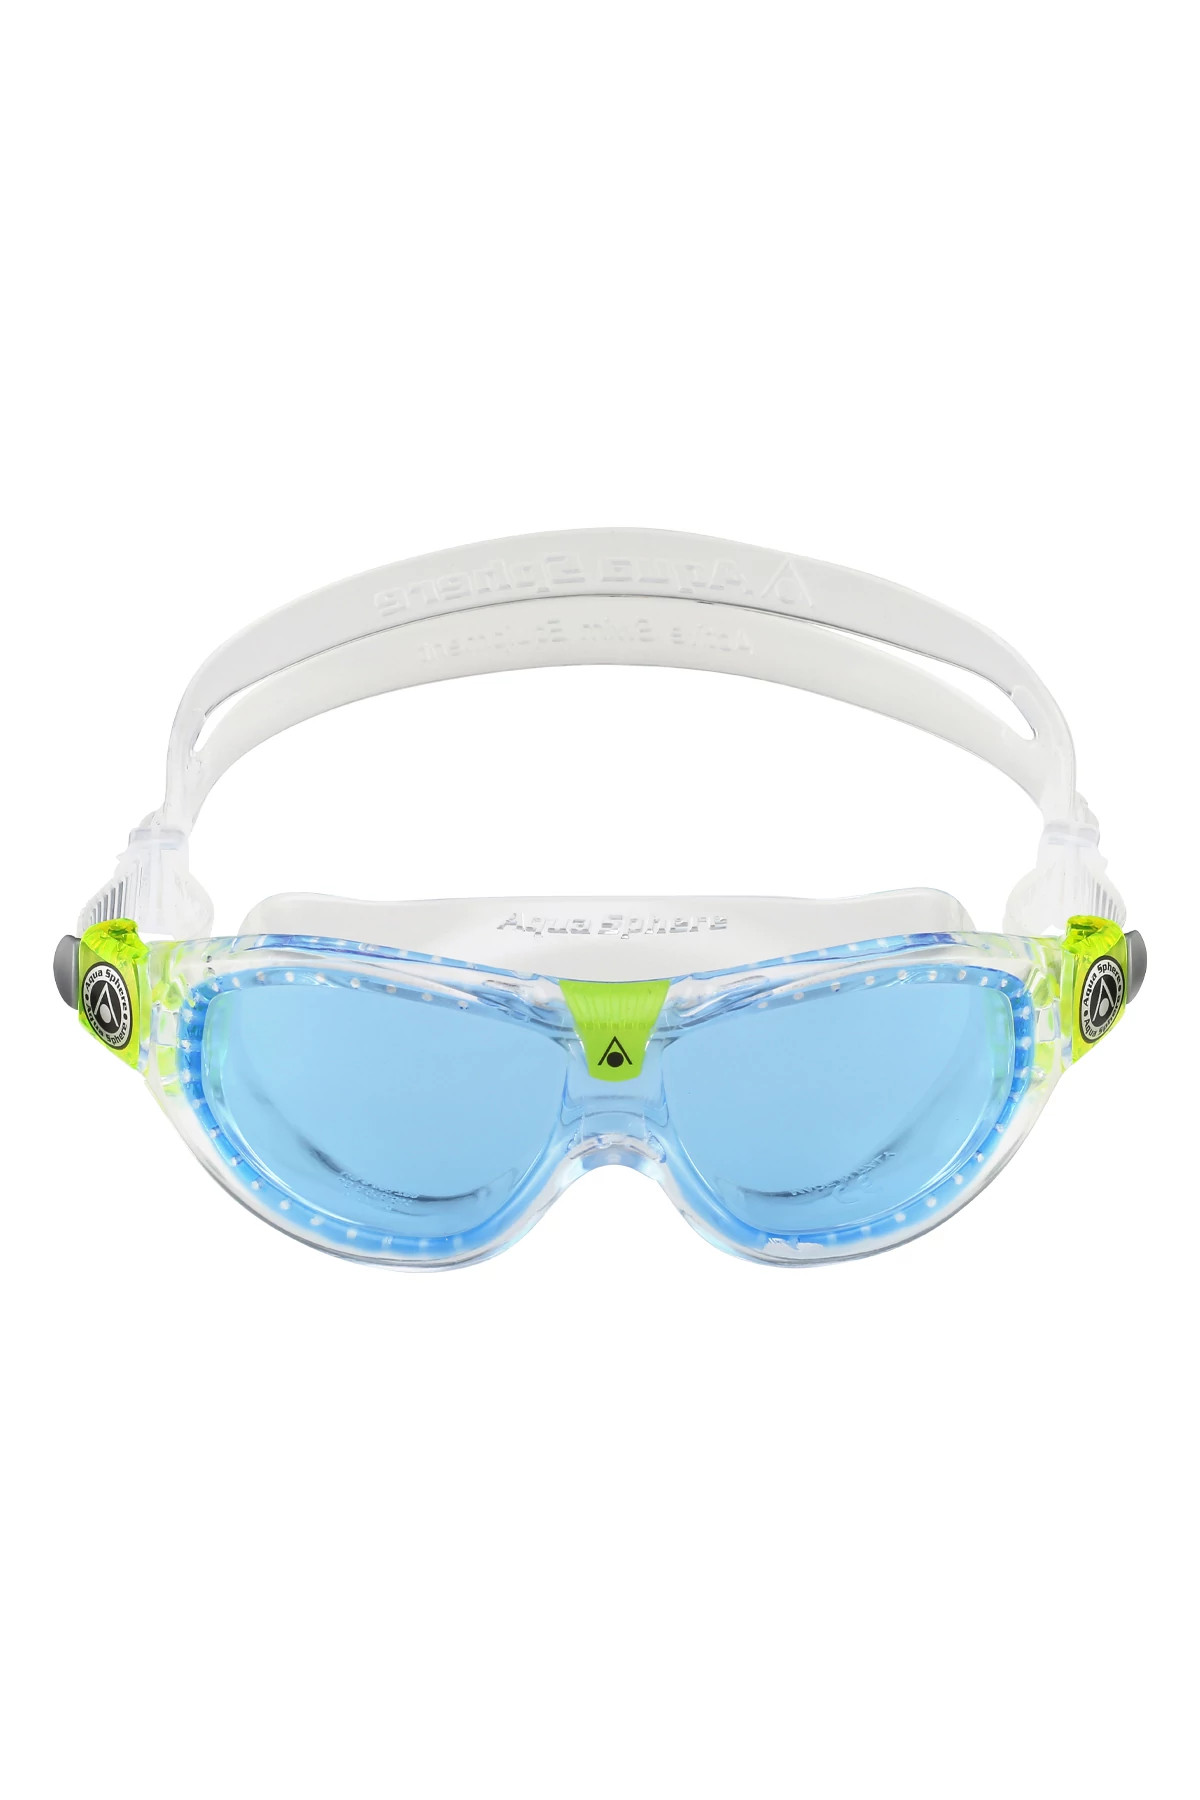 CLEAR/LIME Seal Kid Swim Goggles image number 2